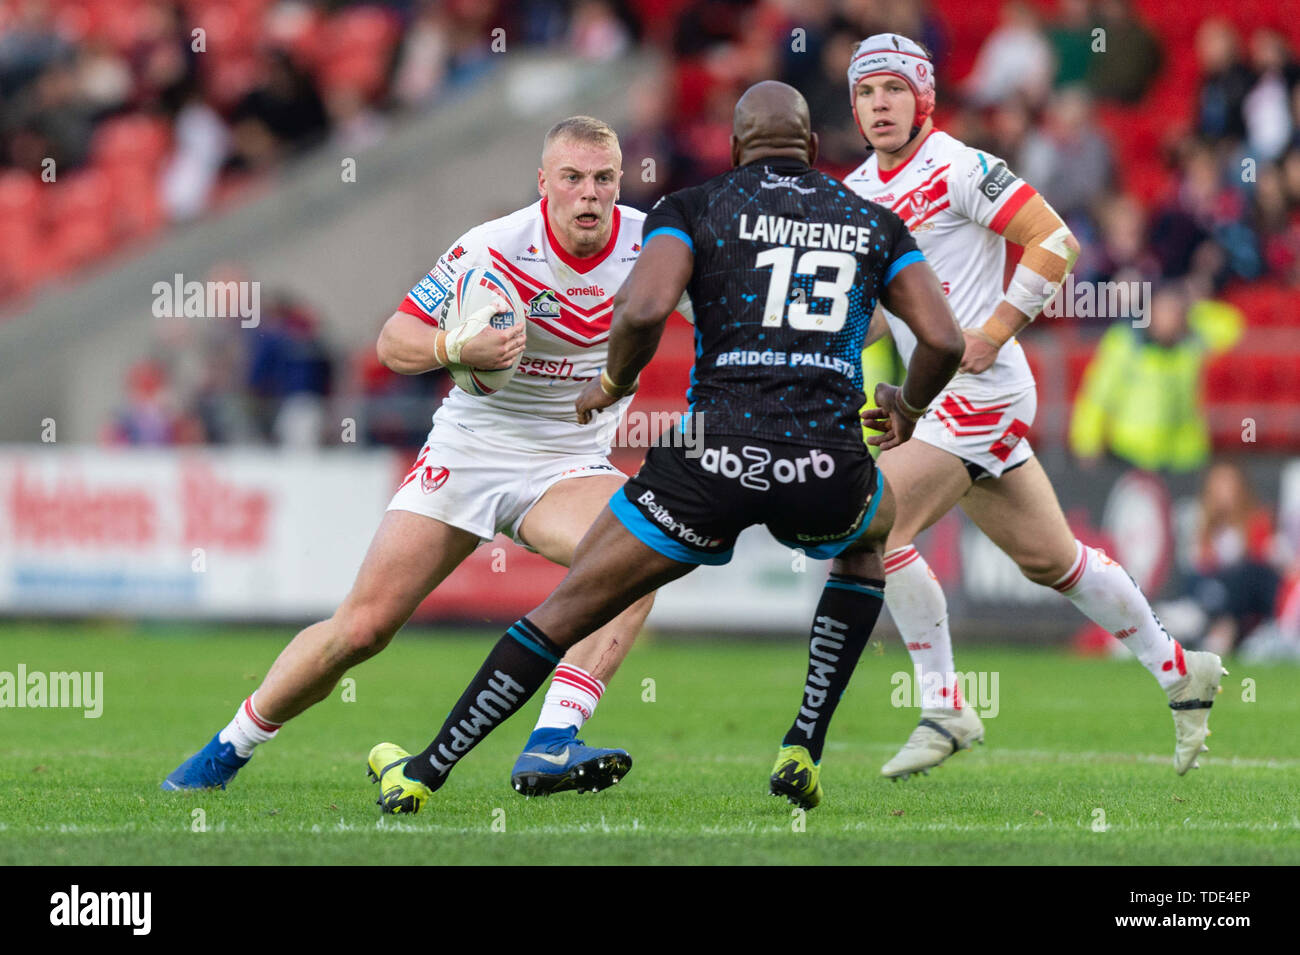 14h June 2019 , Totally Wicked Stadium, St Helens, England;  Betfred Super League, Round 18, St Helens vs Huddersfield Giants, Jack Ashworth of St Helens looks for a way past Michael Lawrence (13) of Huddersfield Giants    Credit: Richard Long/News Images Stock Photo